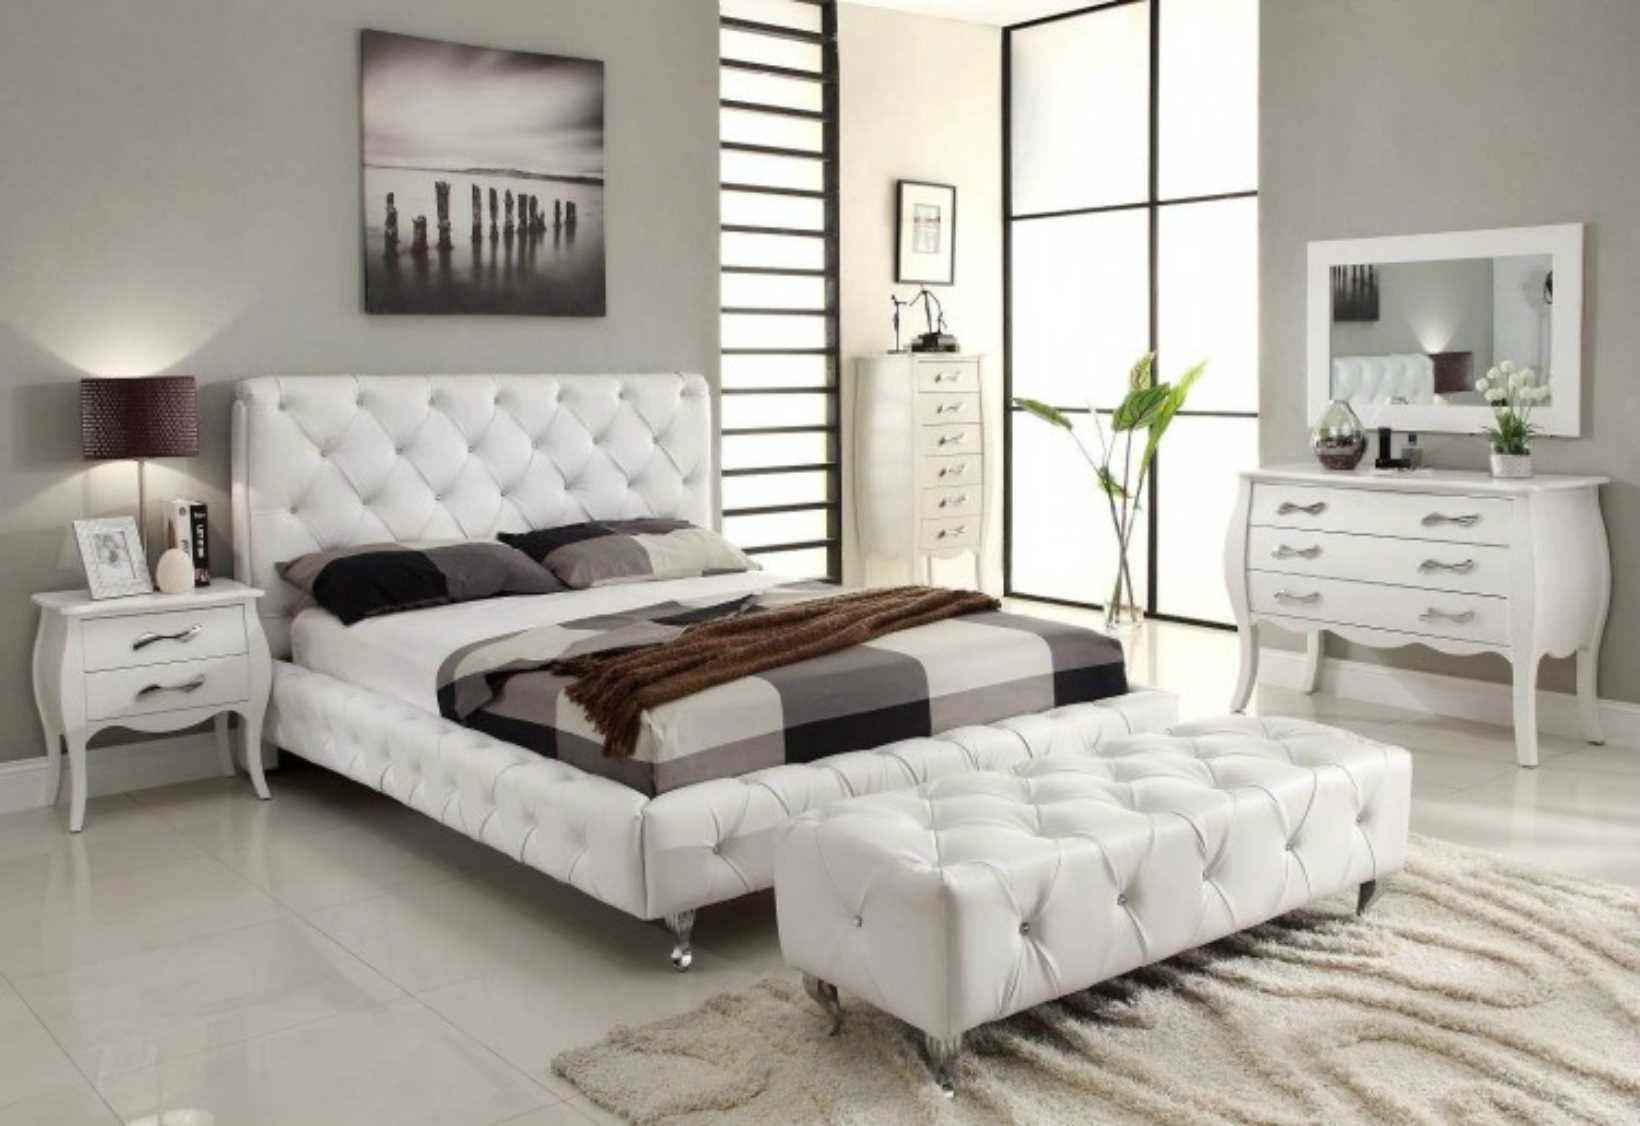 version of the modern bedroom interior in white